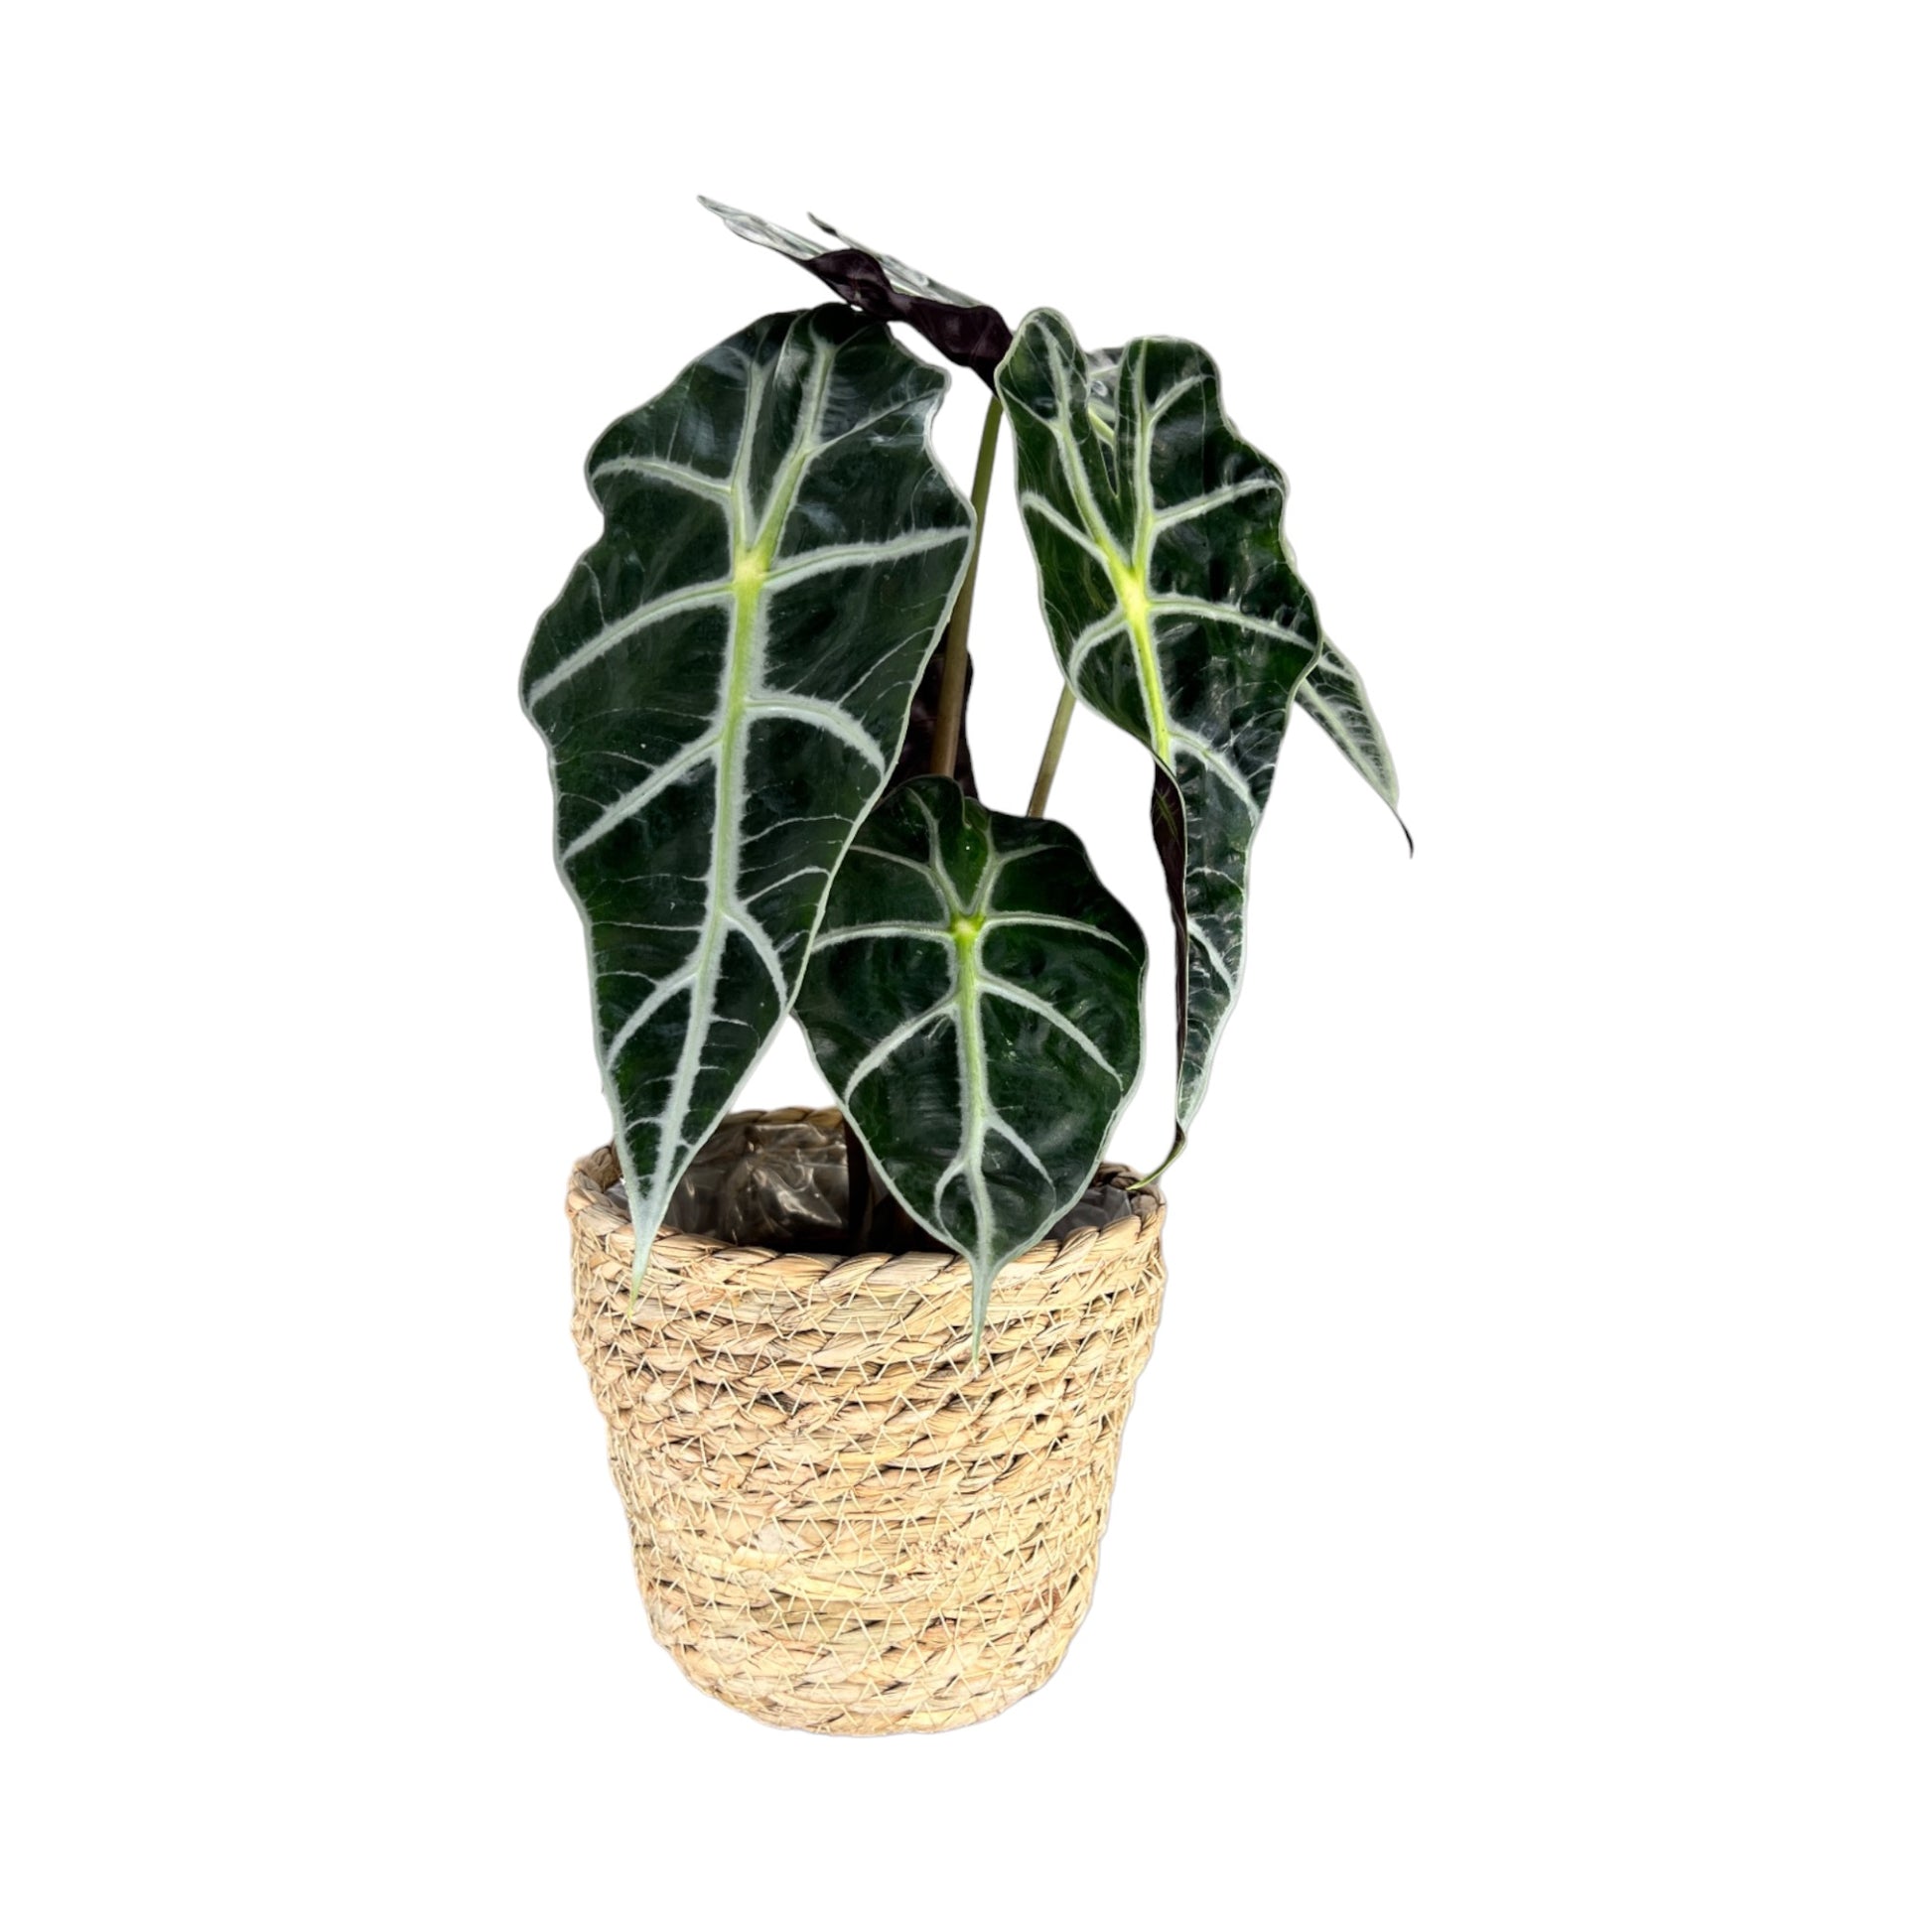 Alocasia 12cm Mix in Basket - Green Plant The Horti House